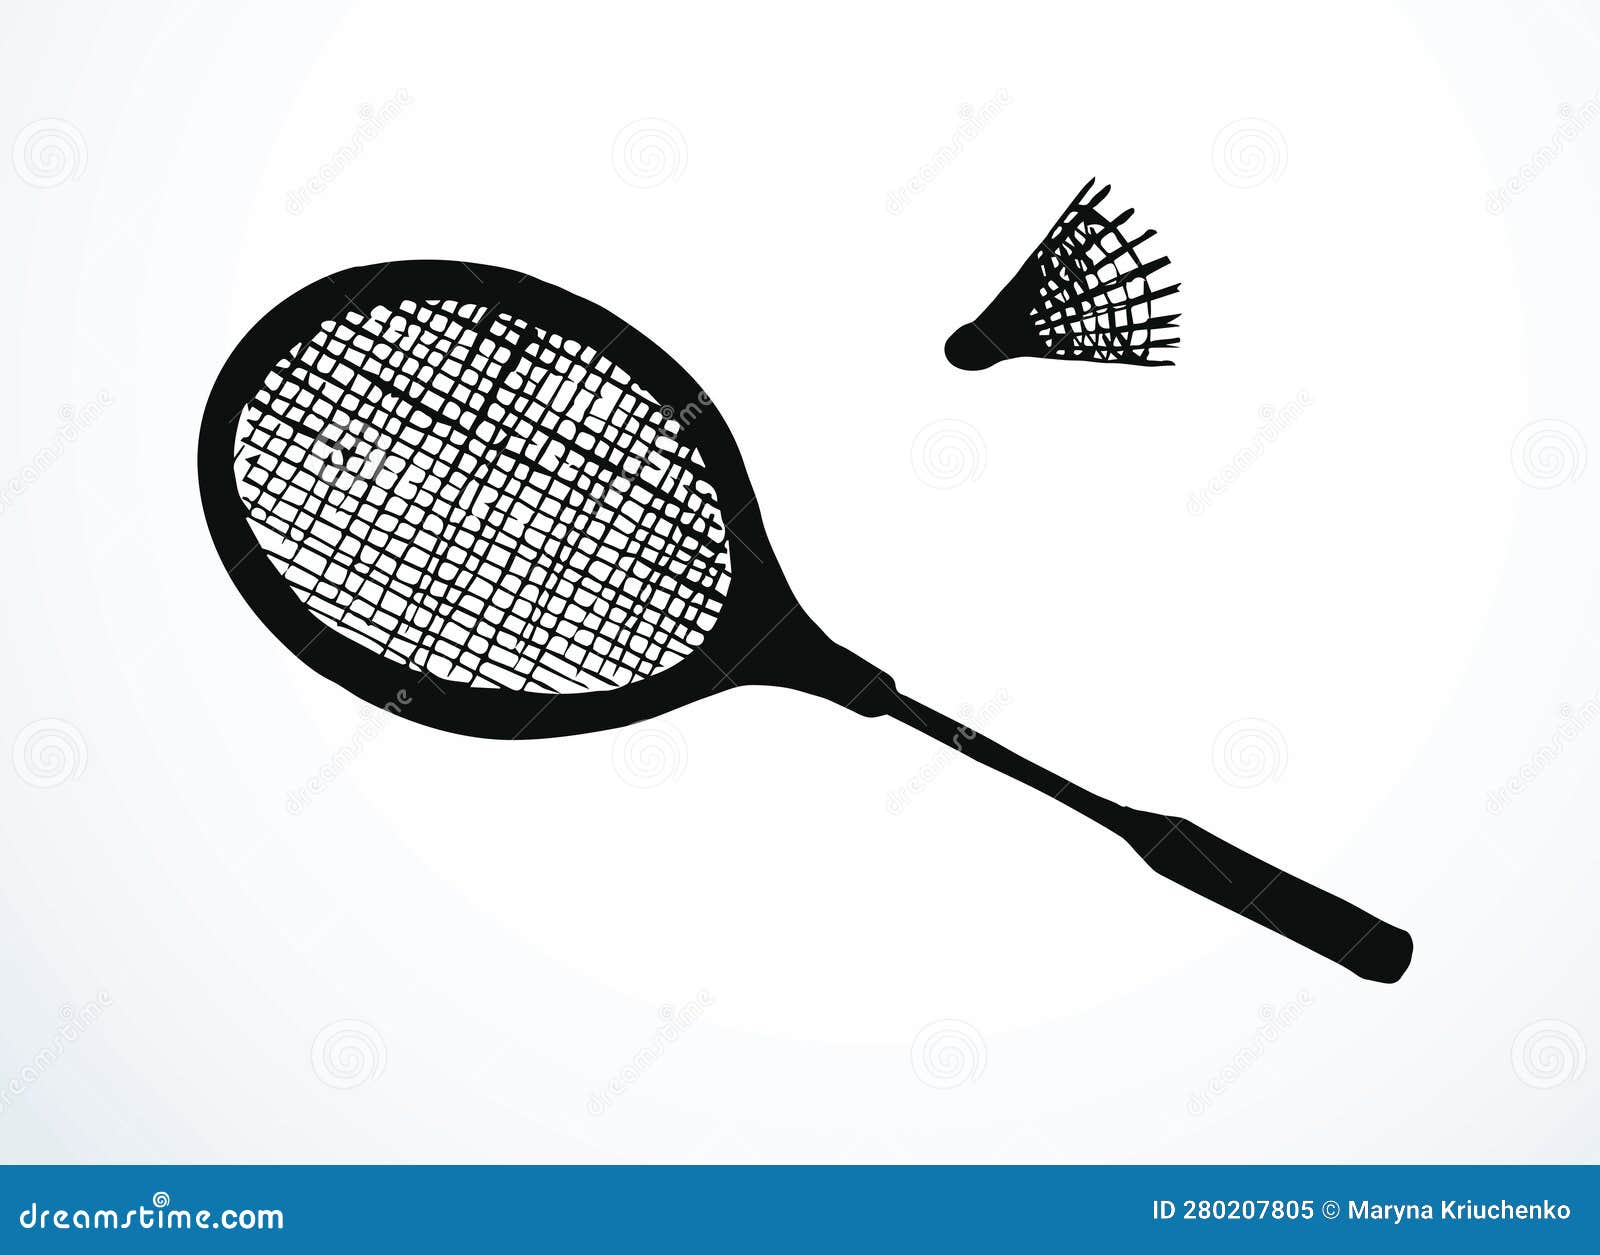 Badminton Player - vector illustration sketch hand drawn with black lines,  isolated on white background, Art Print | Barewalls Posters & Prints |  bwc44905364